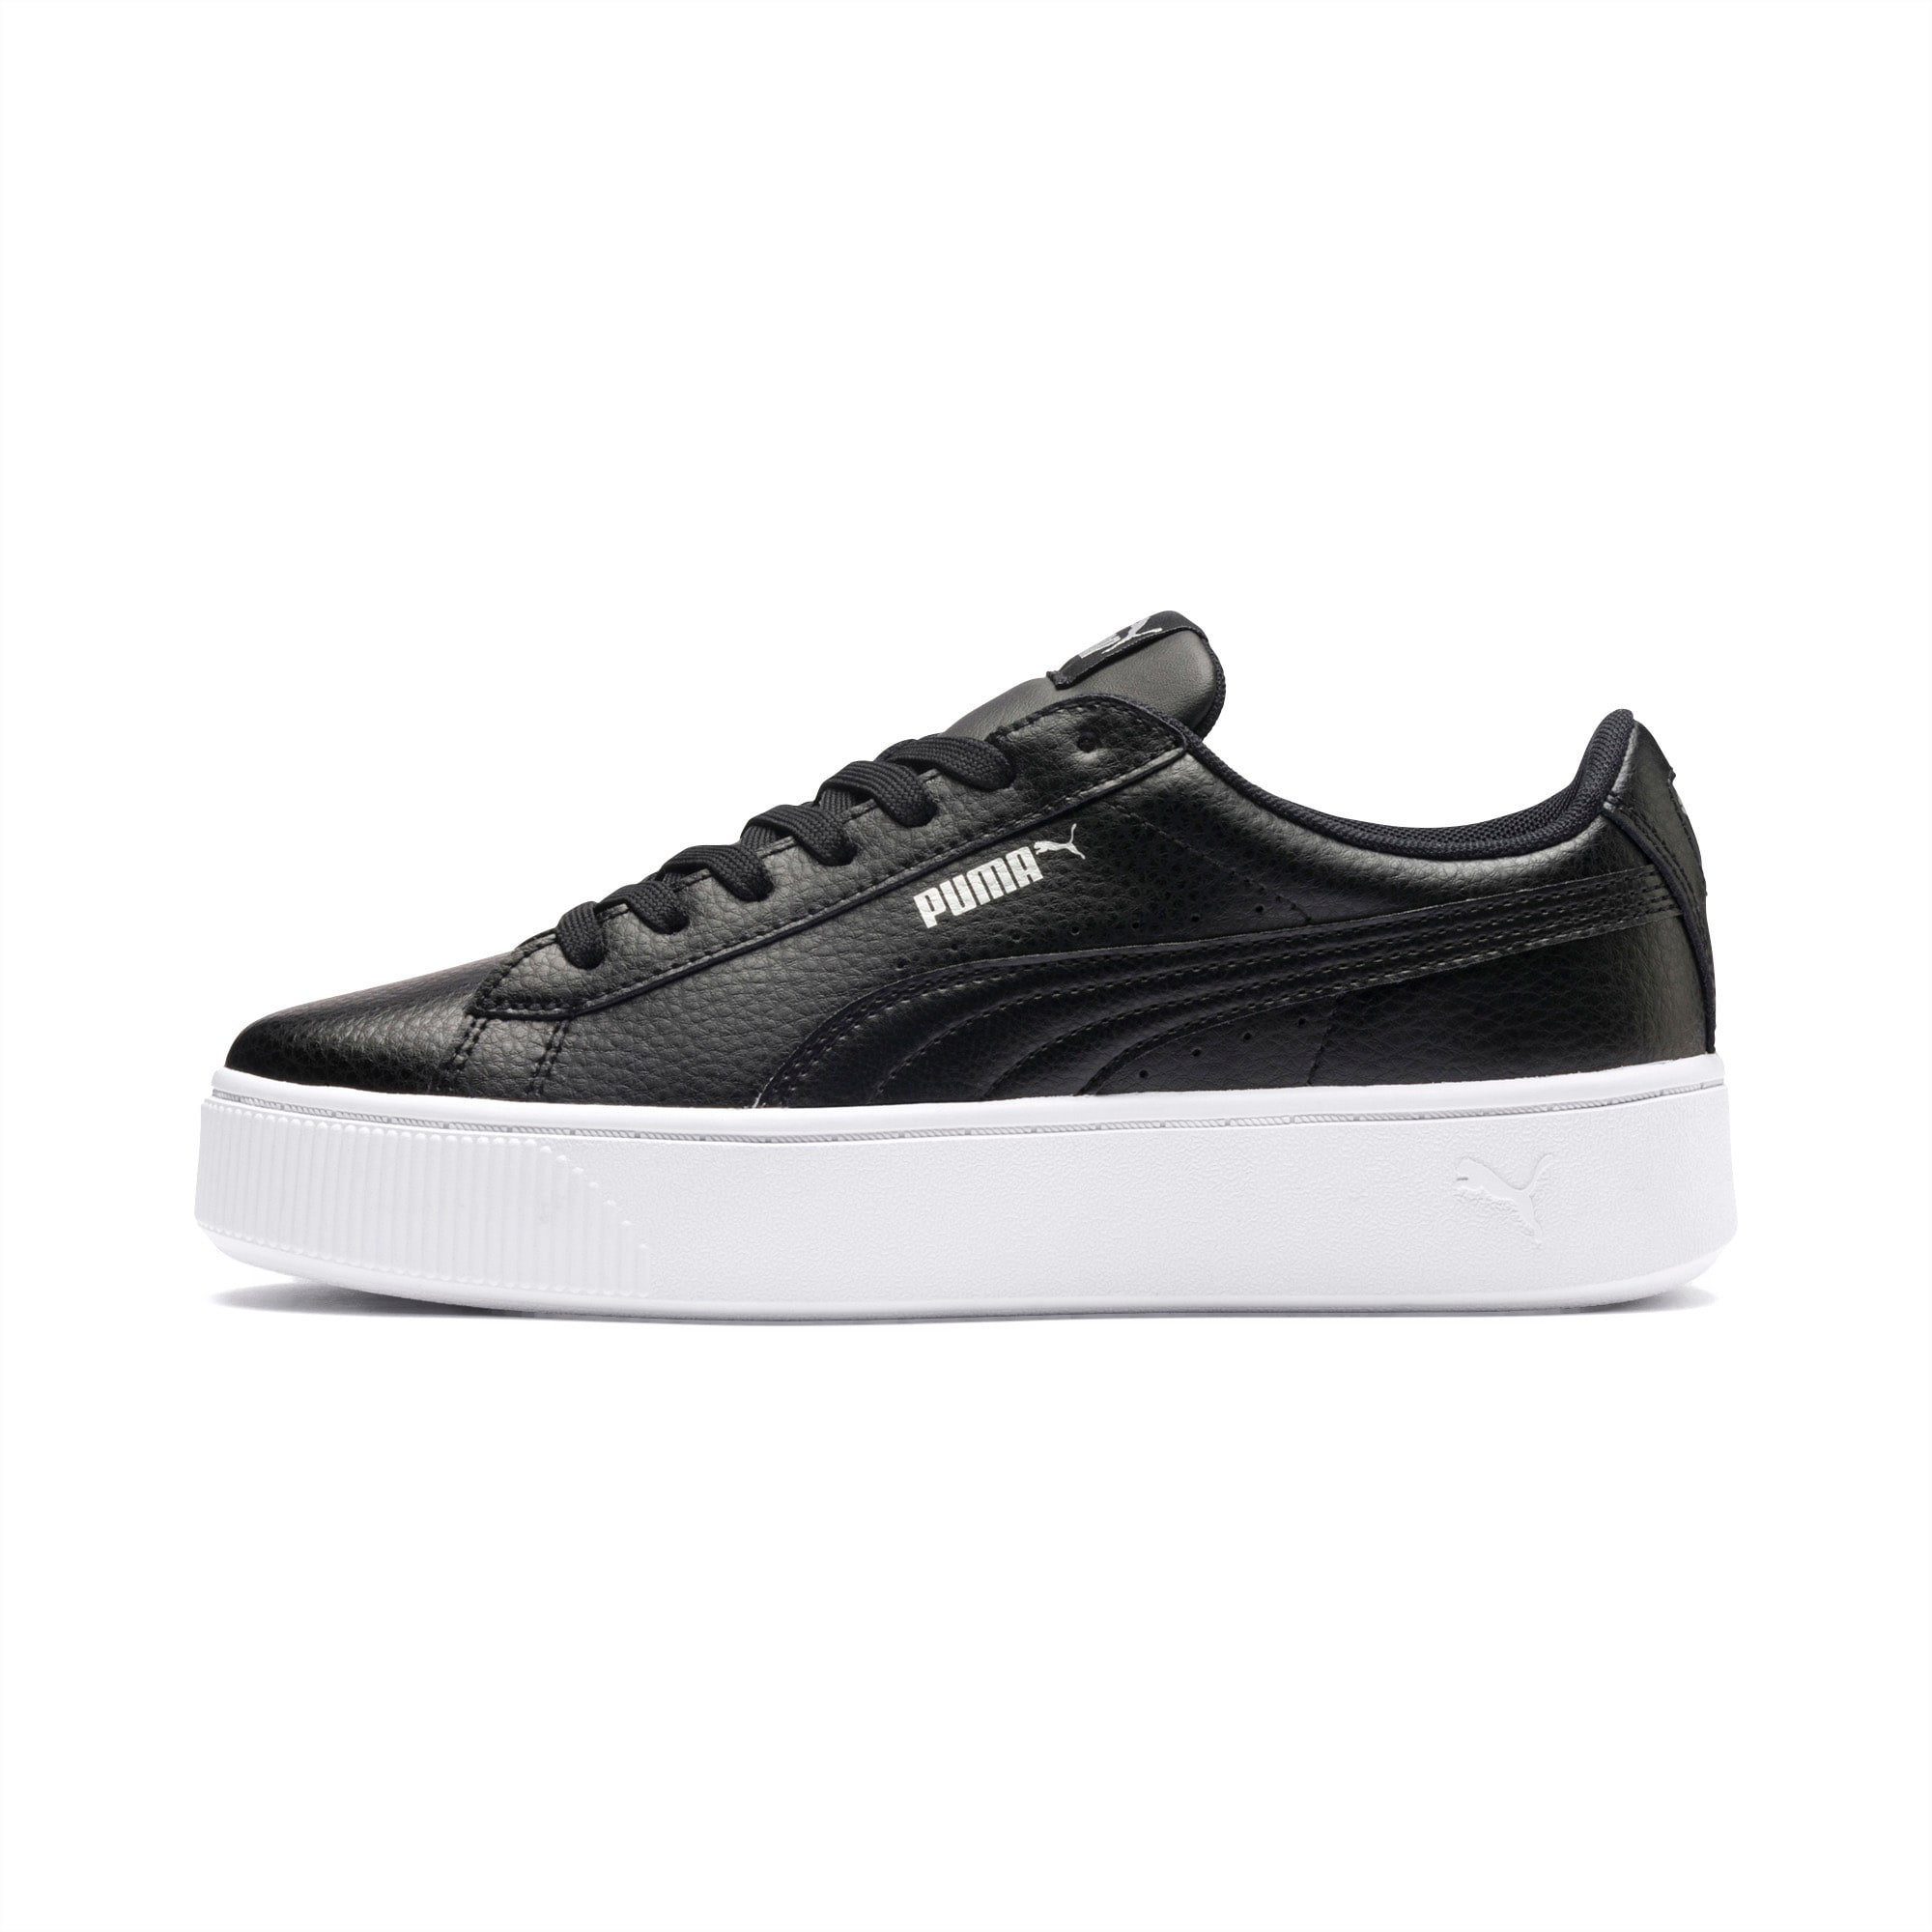 PUMA Vikky Stacked Women's Trainers, Black, Size 35,5, Shoes